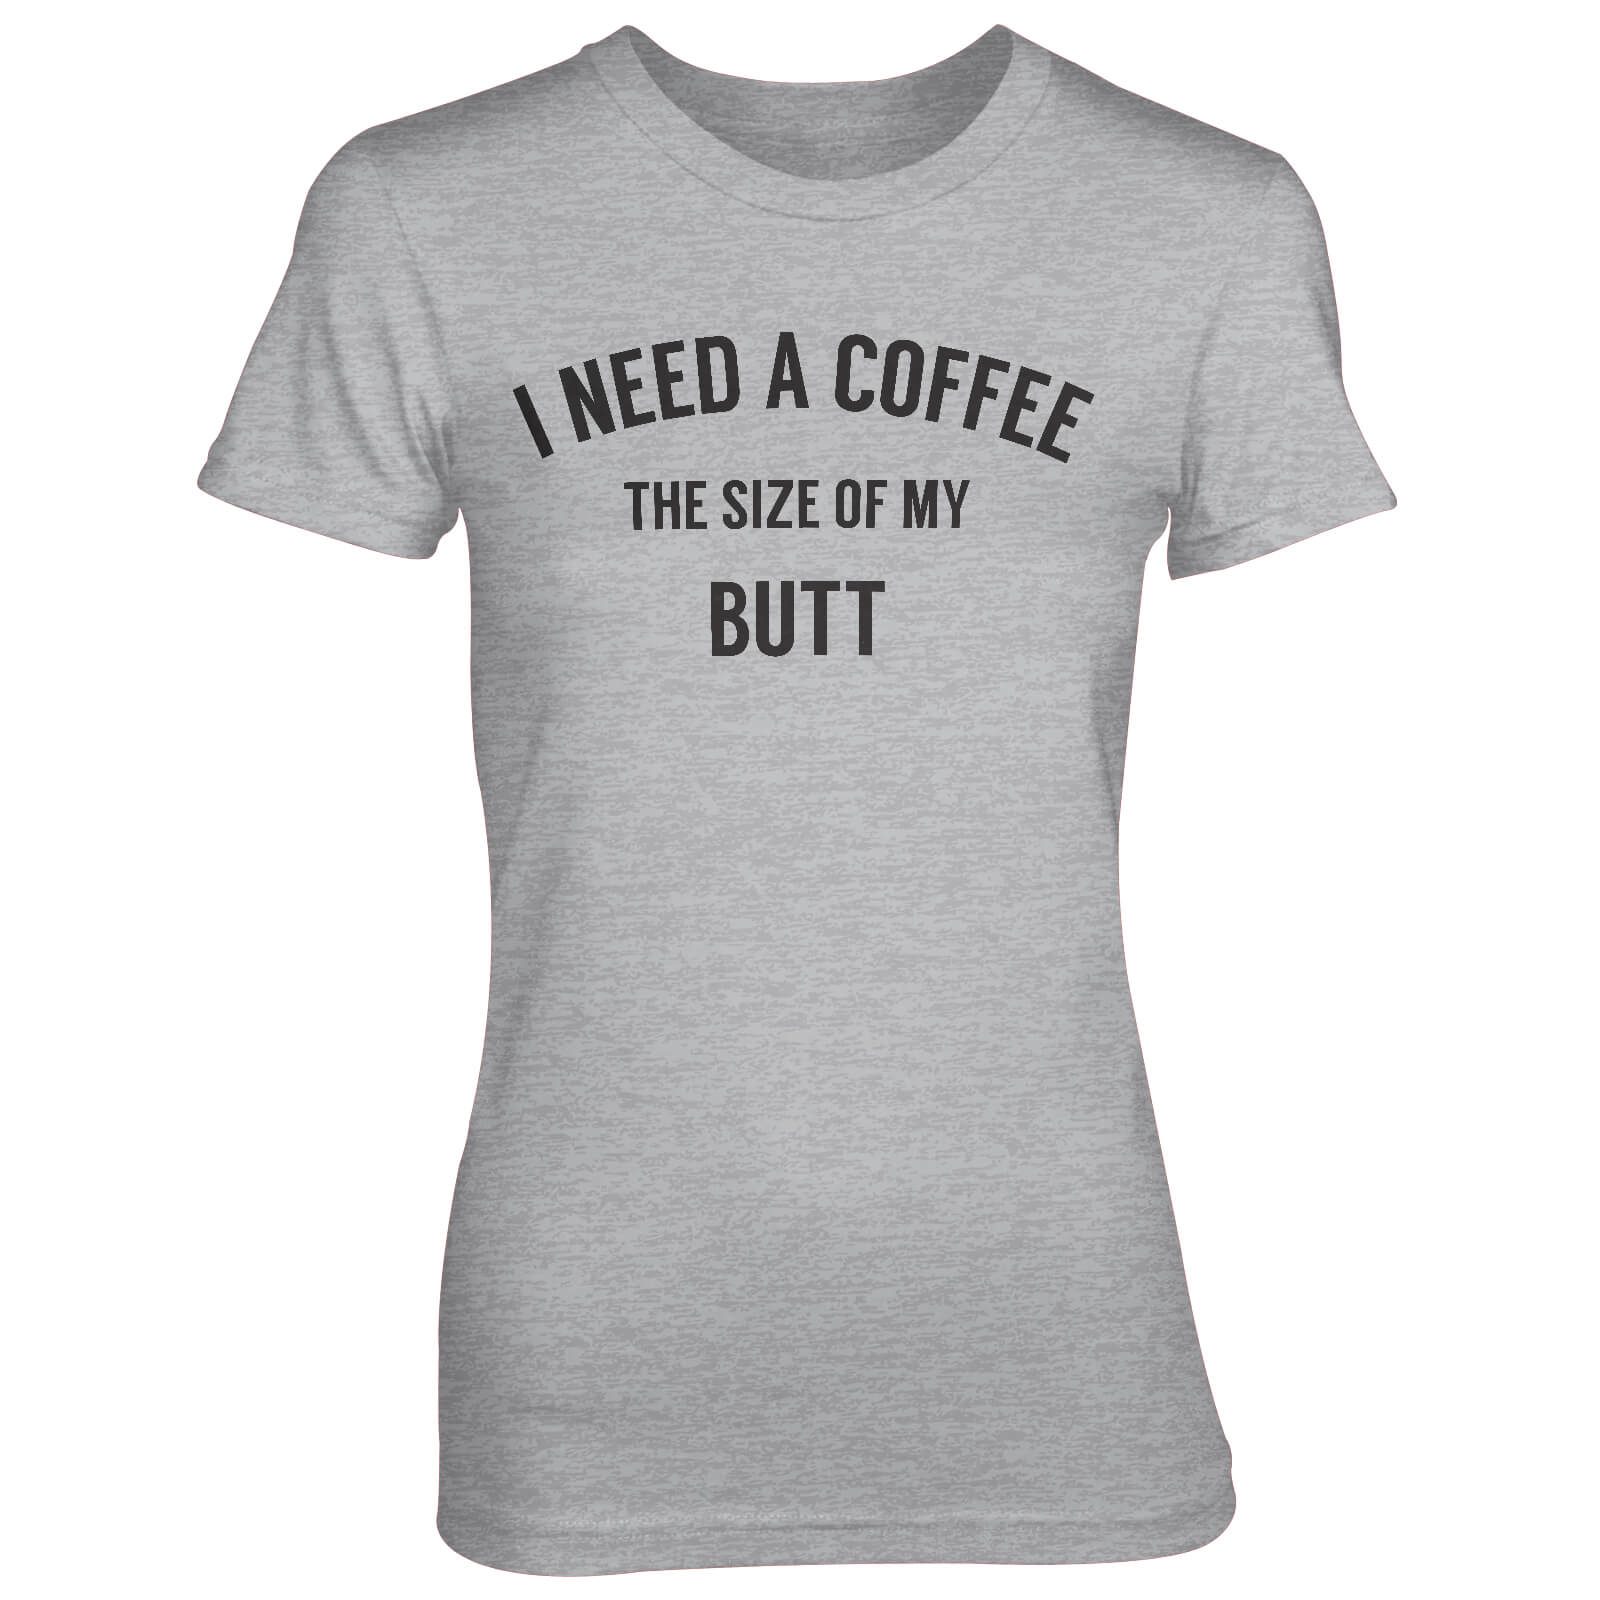 I Need A Coffee The Size Of My Butt Women's Grey T-Shirt - S - Grey